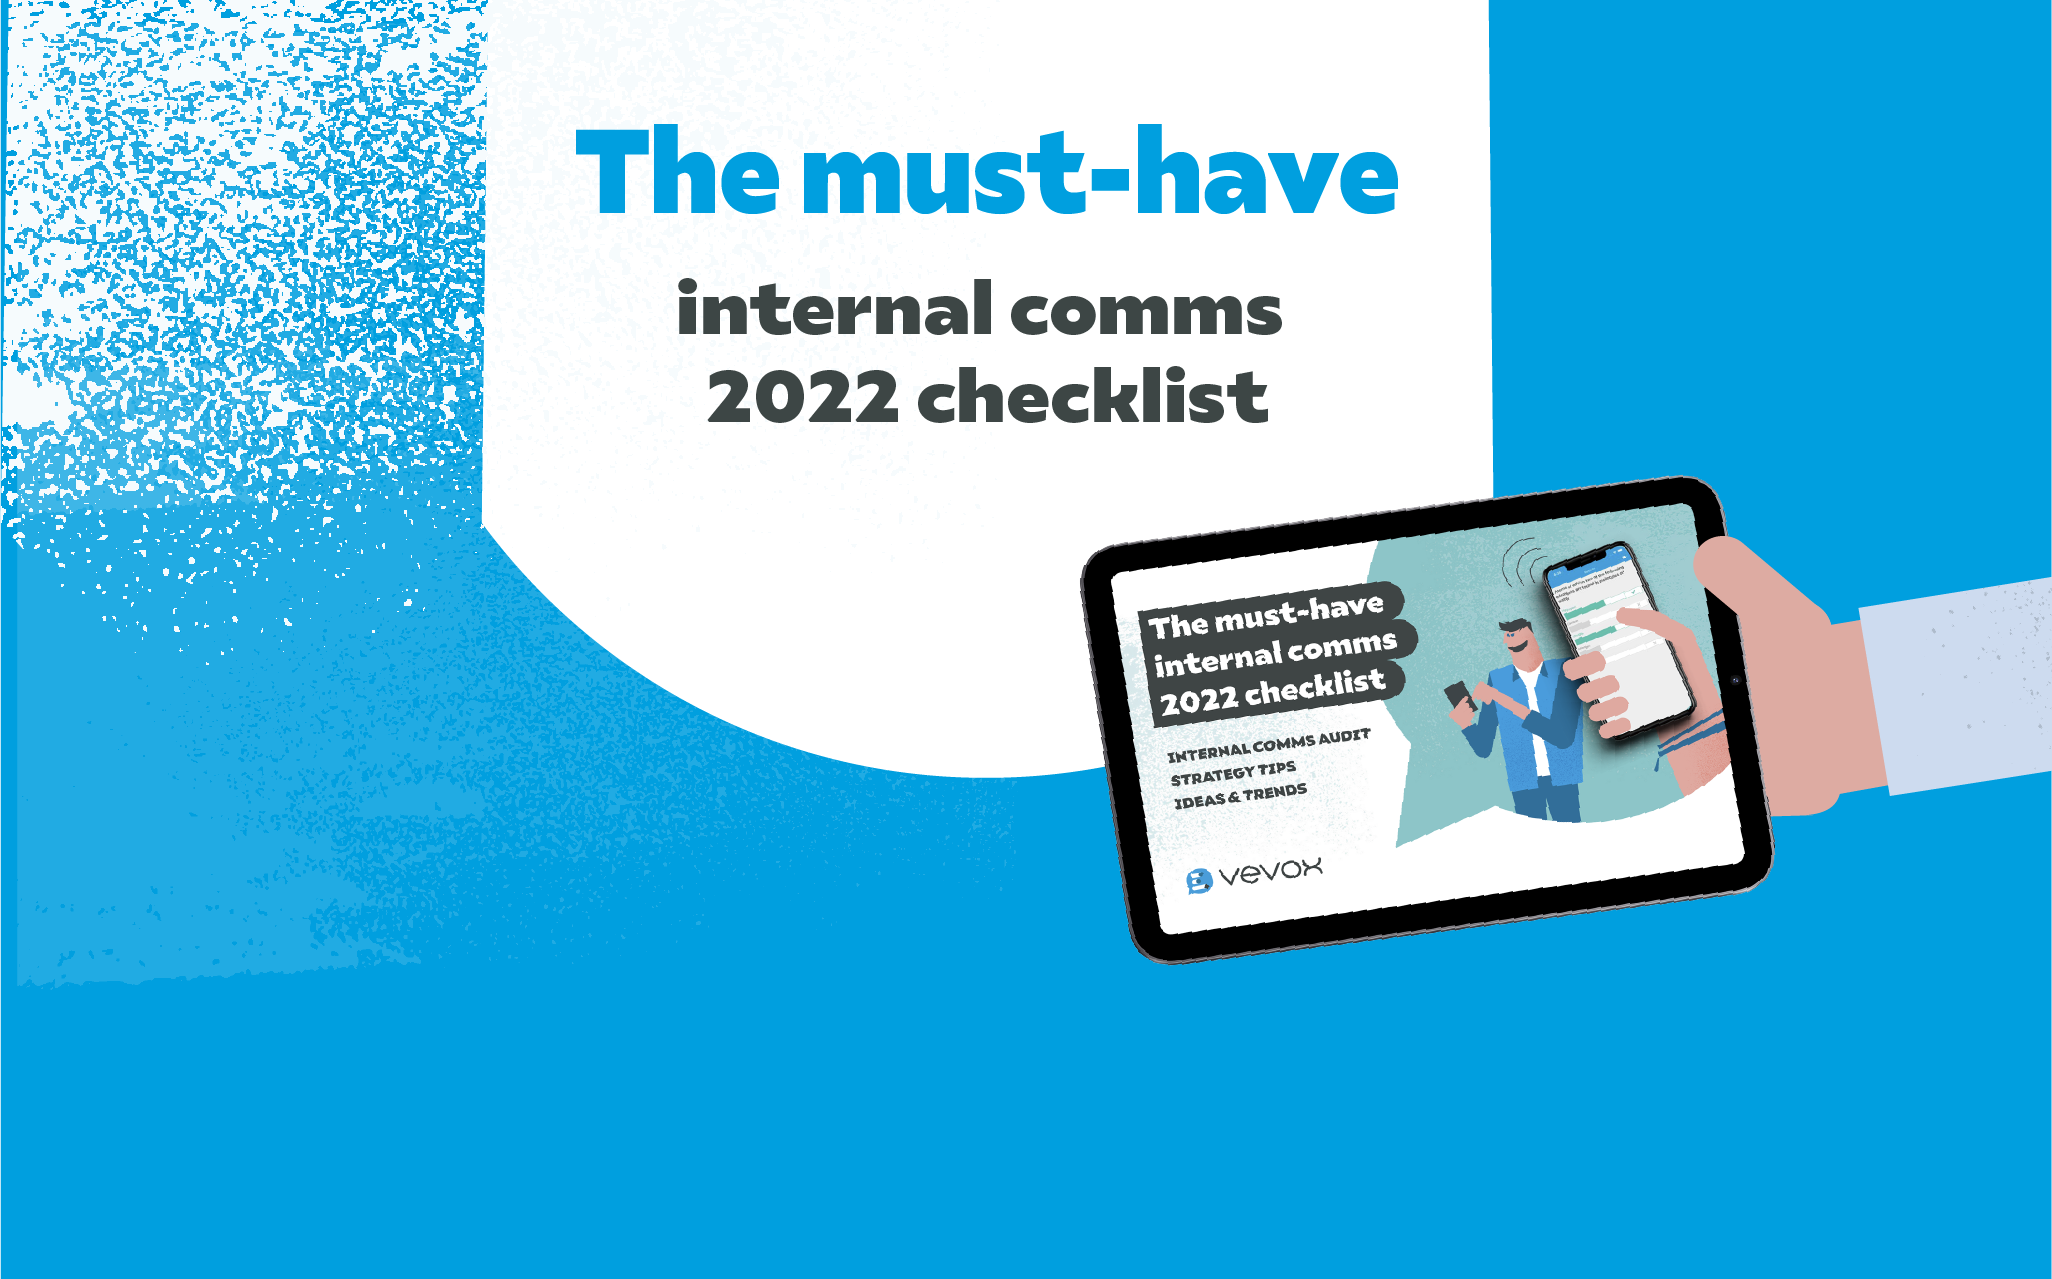 The must-have internal comms 2022 checklist